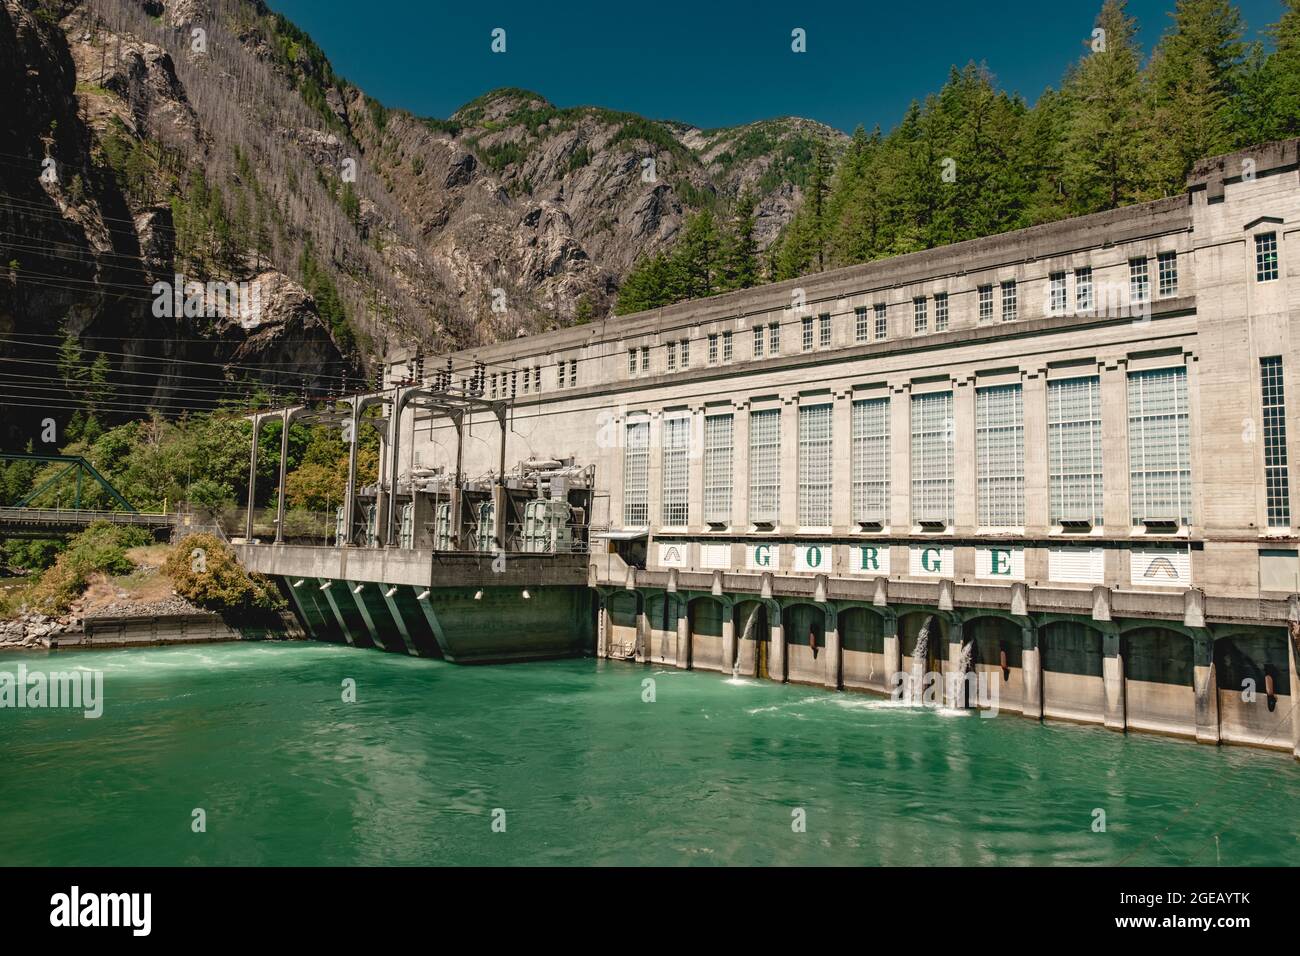 Gorge Powerhouse hydroelectric power plant along the Skagit River in North Cascades National Park. Stock Photo